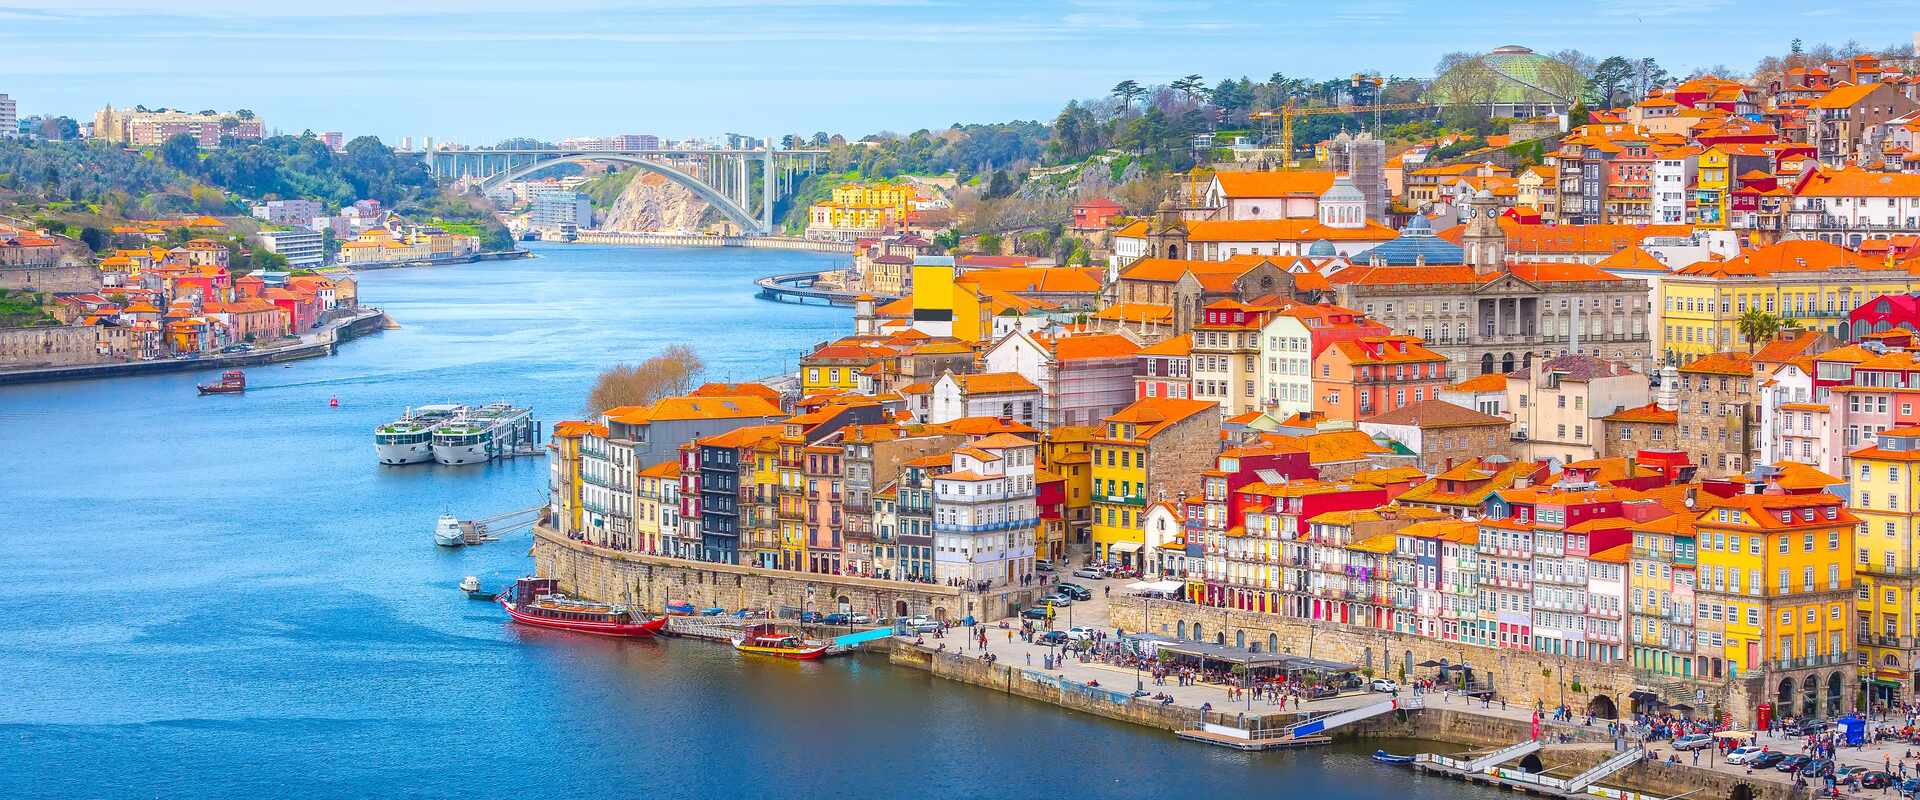 Vibrant buildings lining the Douro River known as Porto, Portugal  